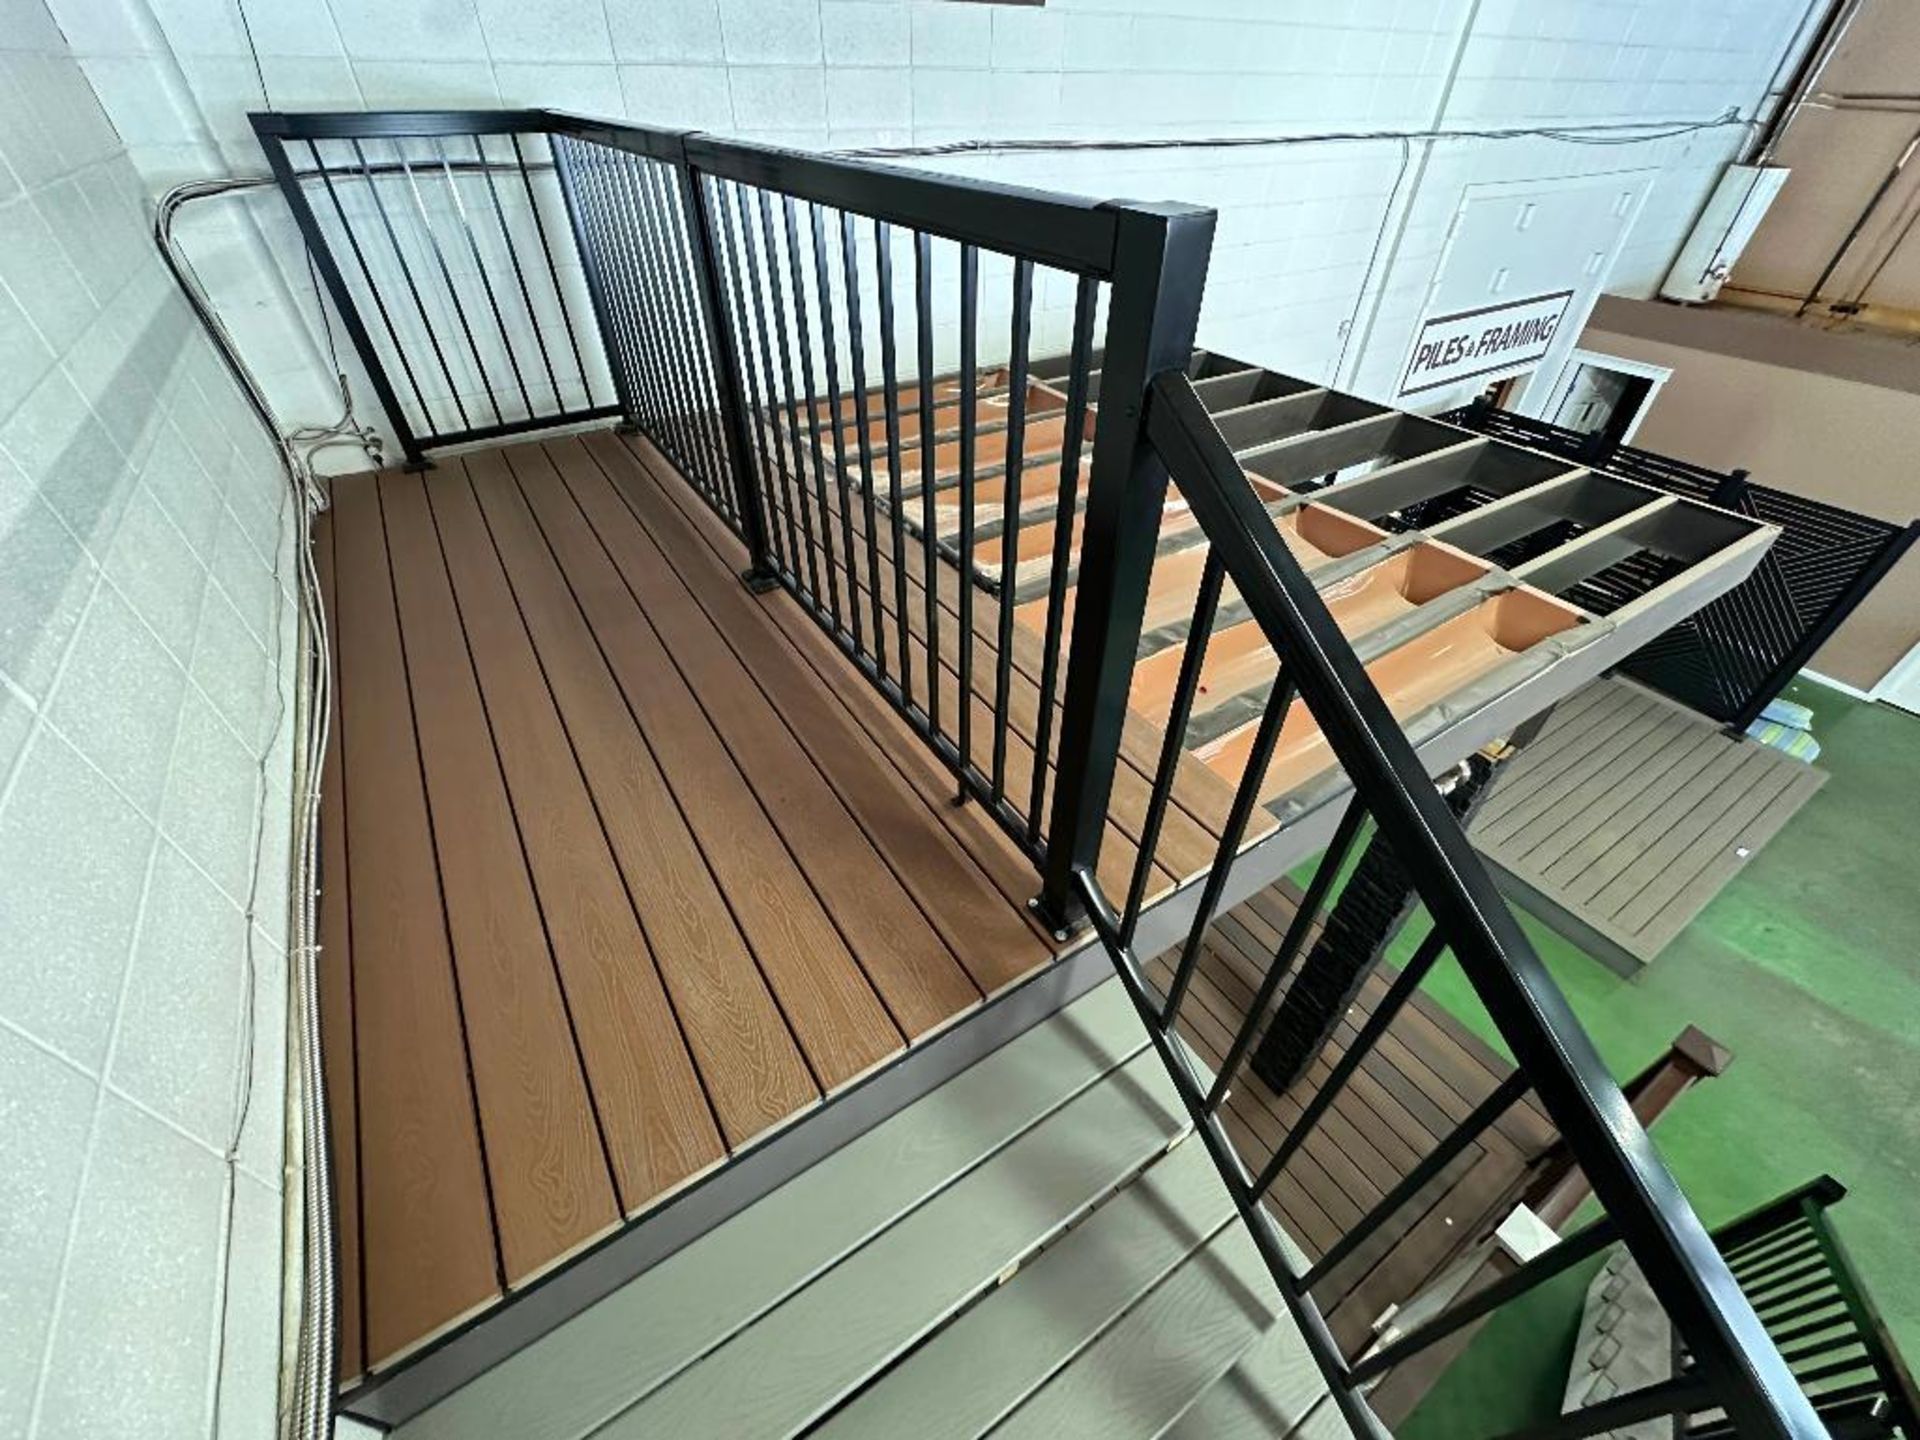 Lot of 164" X 163" Bottom Composite Deck, 168" X 120" Top Deck, Posts, 50" Stairs, Gate, etc. - Image 7 of 9